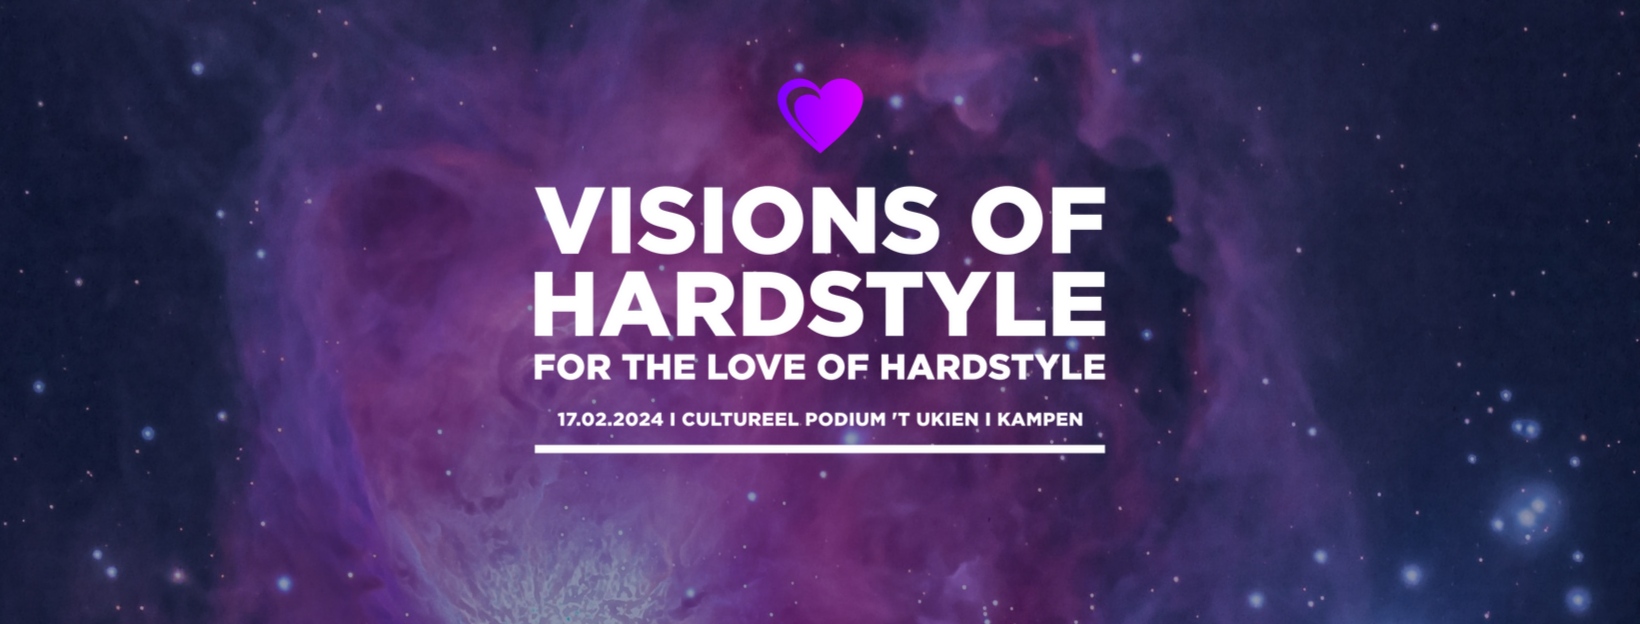 Visions of Hardstyle | For The Love of Hardstyle